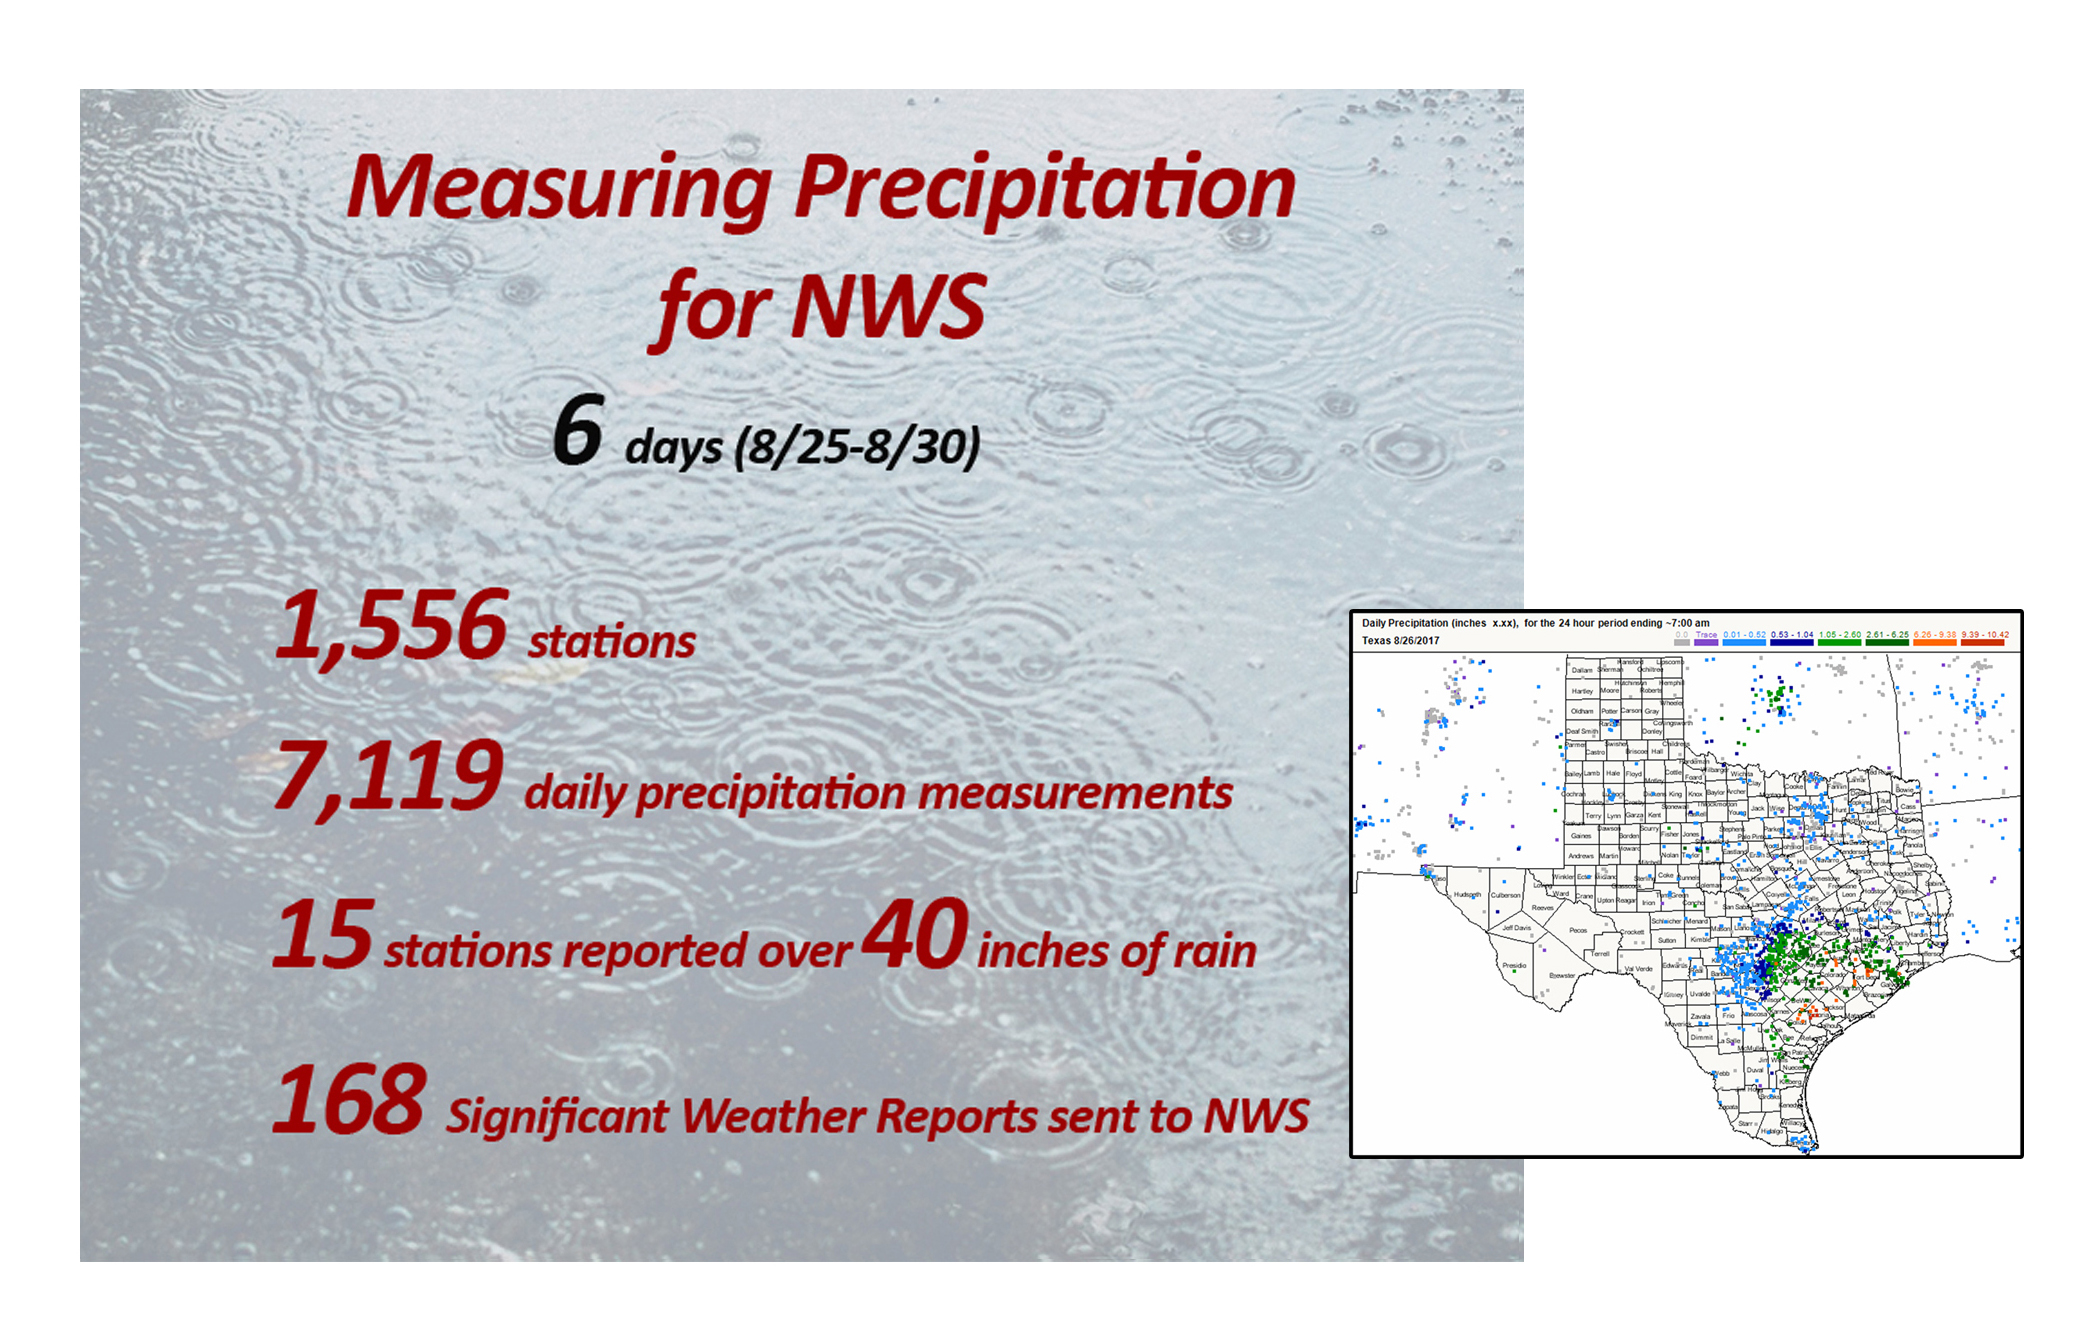 The Community Collaborative Rain, Hail & Snow Network played a vital role, tracking and mapping extreme rain as Hurricane Harvey made landfall in Texas, giving NWS forecasters a better real-time picture of what was happening on the ground.